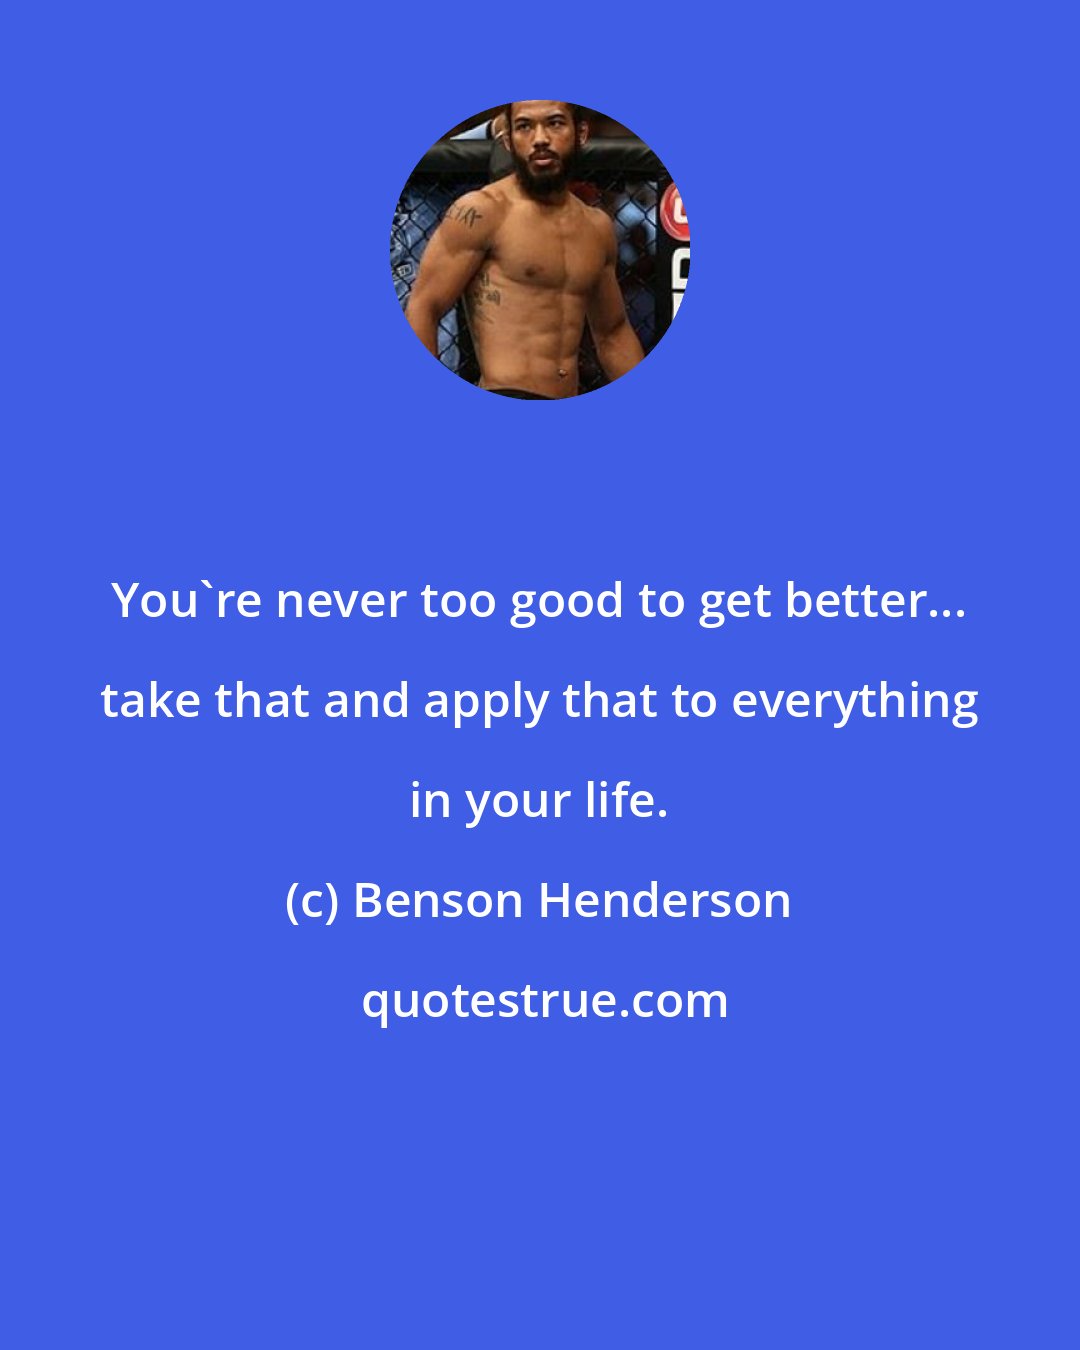 Benson Henderson: You're never too good to get better... take that and apply that to everything in your life.